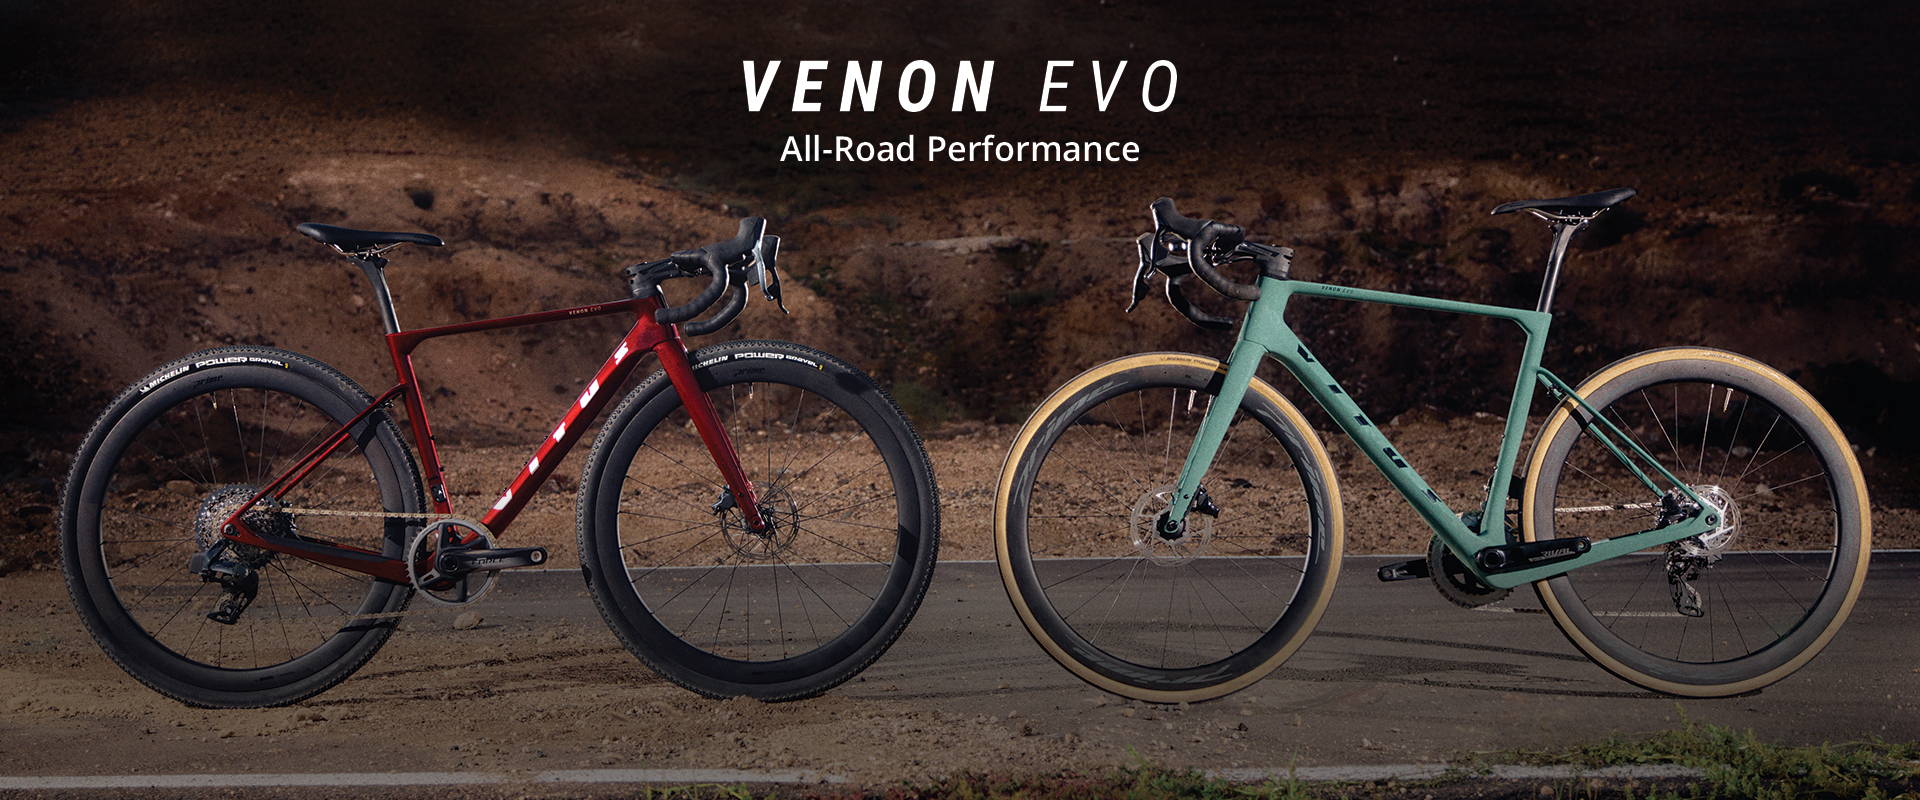 The new Venon EVO side by side 